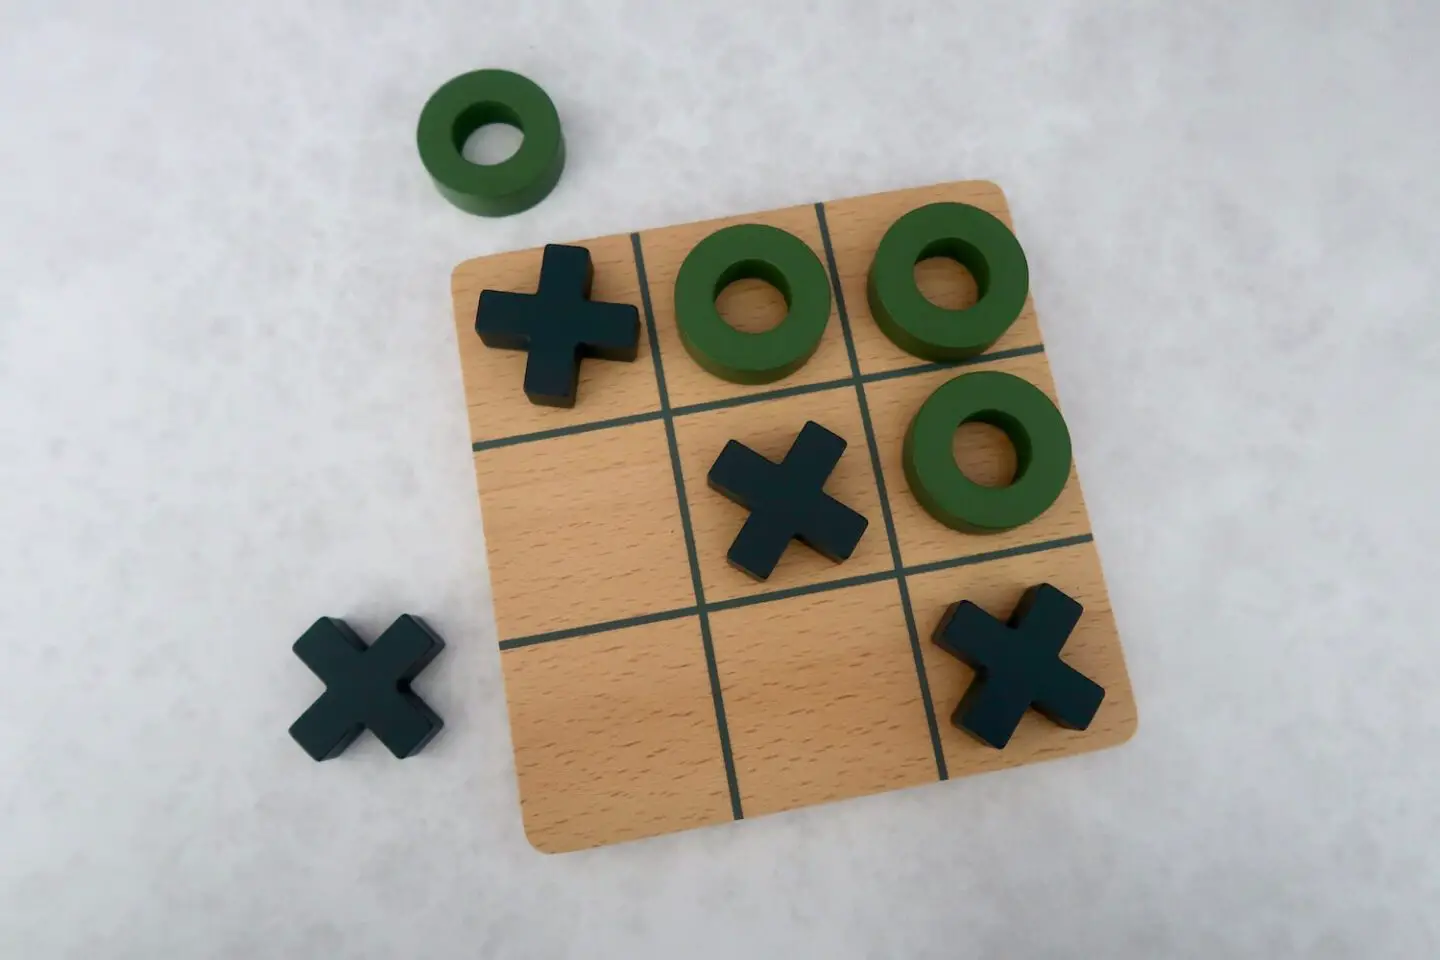 A wooden tic-tac-tie board with wooden noughts and crosses